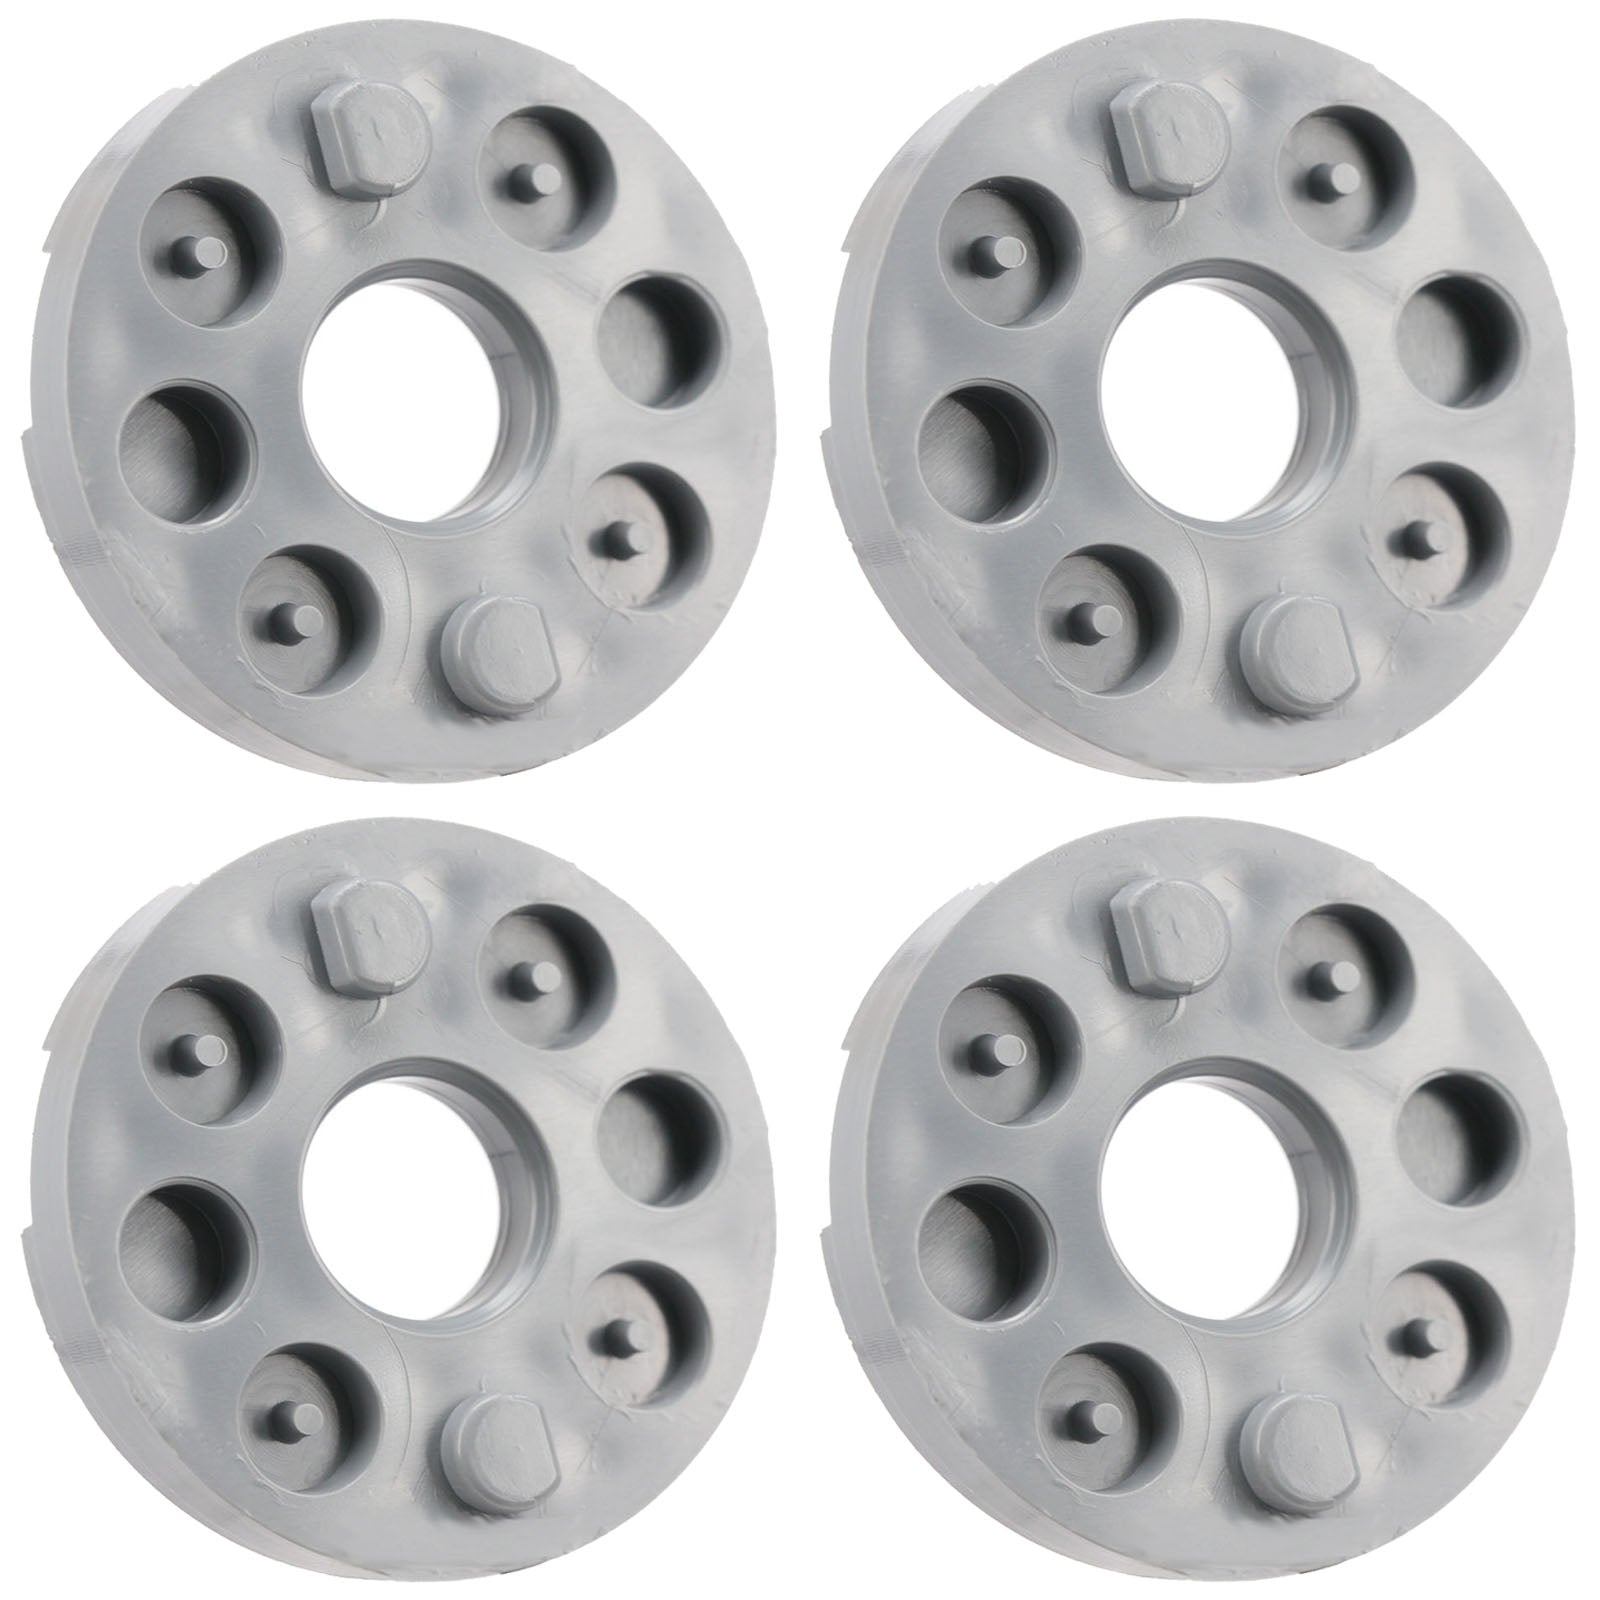 Blade Height Spacers for FLYMO Lawnmower x 4